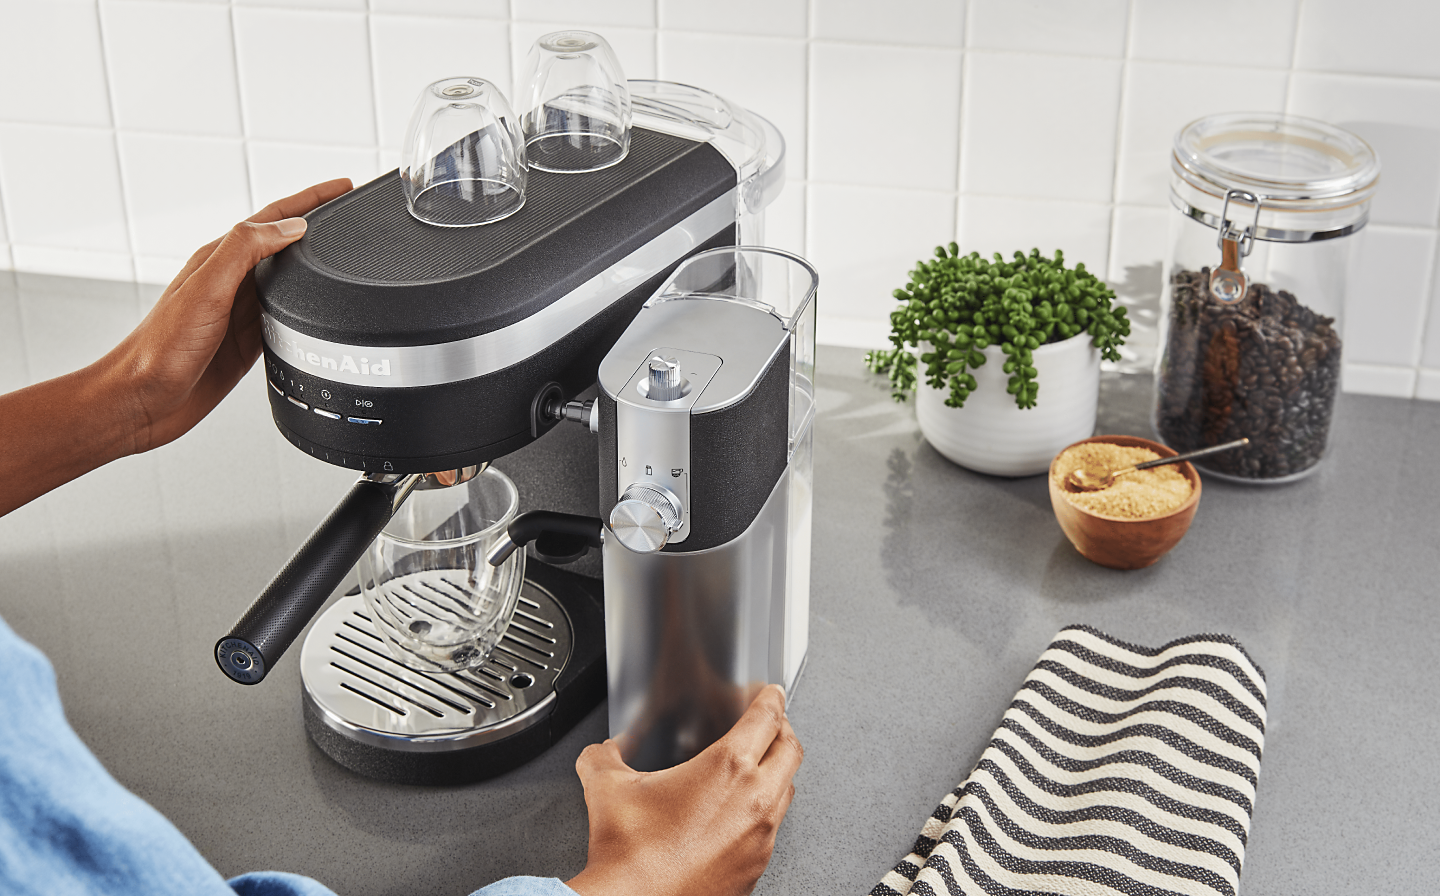 https://kitchenaid-h.assetsadobe.com/is/image/content/dam/business-unit/kitchenaid/en-us/marketing-content/site-assets/page-content/pinch-of-help/how-to-clean-a-milk-frother/Milk-Frother_Image_2.png?fmt=png-alpha&qlt=85,0&resMode=sharp2&op_usm=1.75,0.3,2,0&scl=1&constrain=fit,1